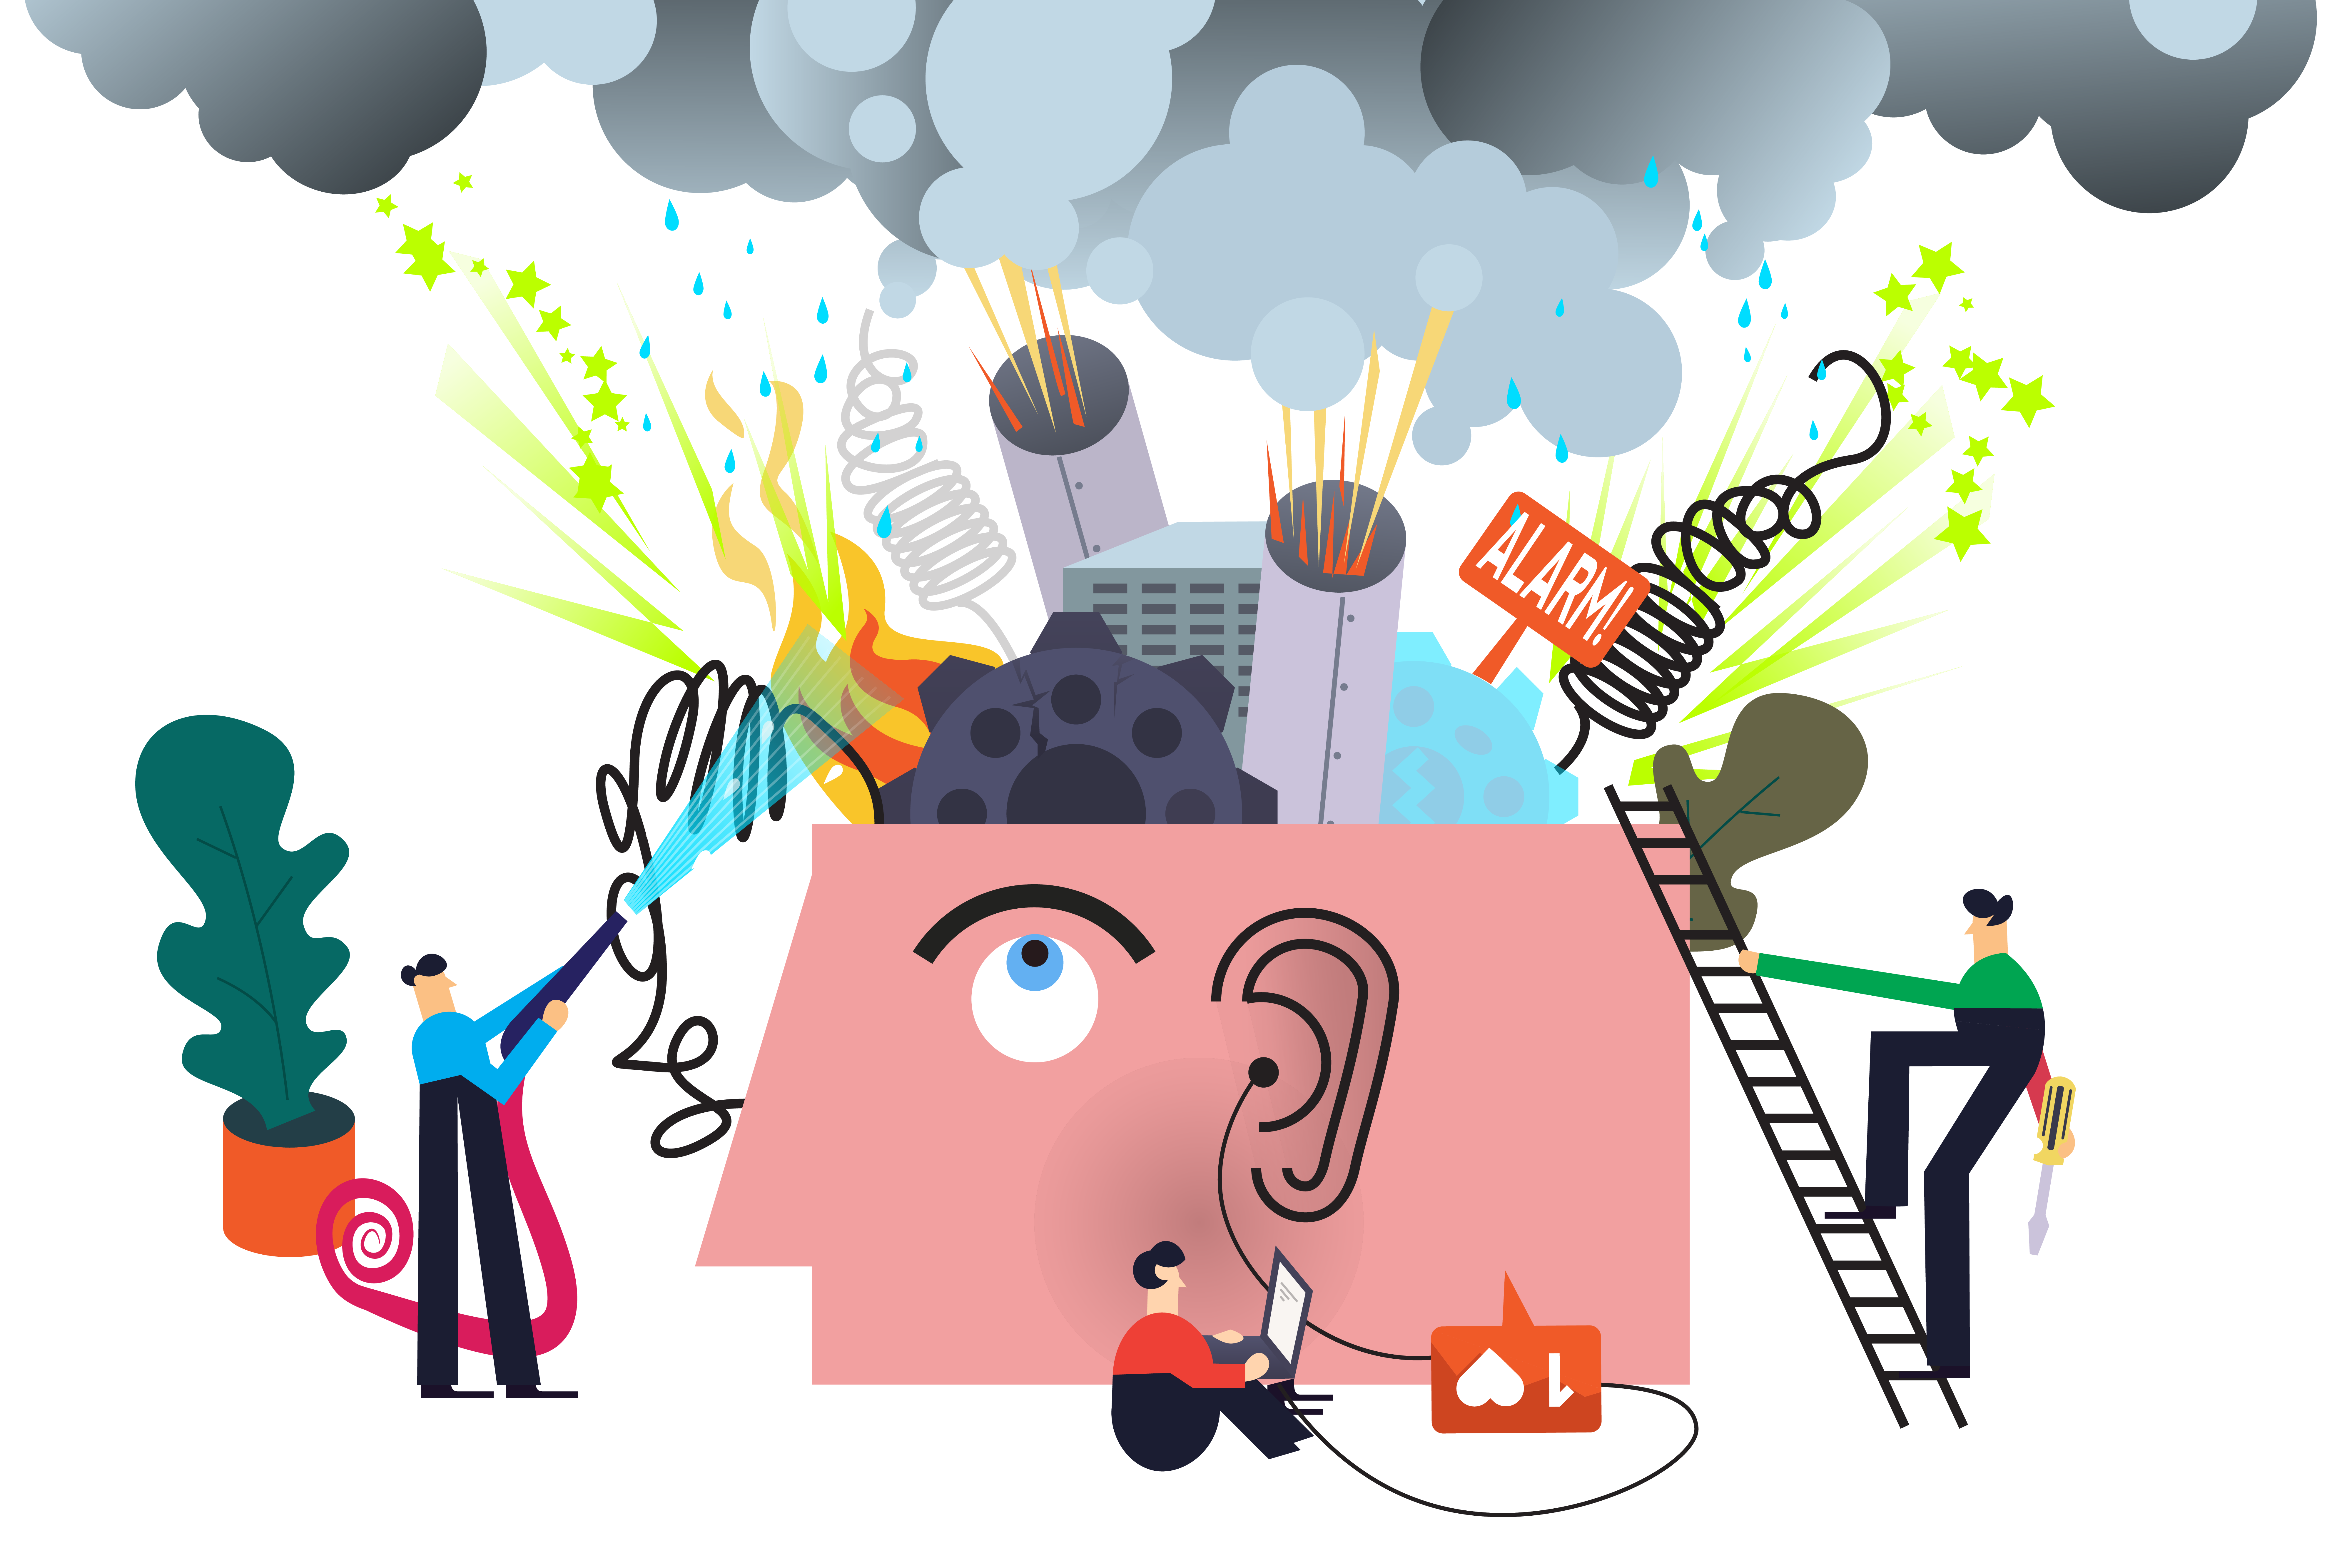 An illustration of a man’s open head. Where his brain should be is smoking machinery and gears. A figure of a person holding a hose shoots water trying to put out the fire. Another holds a screwdriver and climbs a ladder toward the open head. Another figure sits in front of the head on a laptop with a cord plugged into the head’s ear.